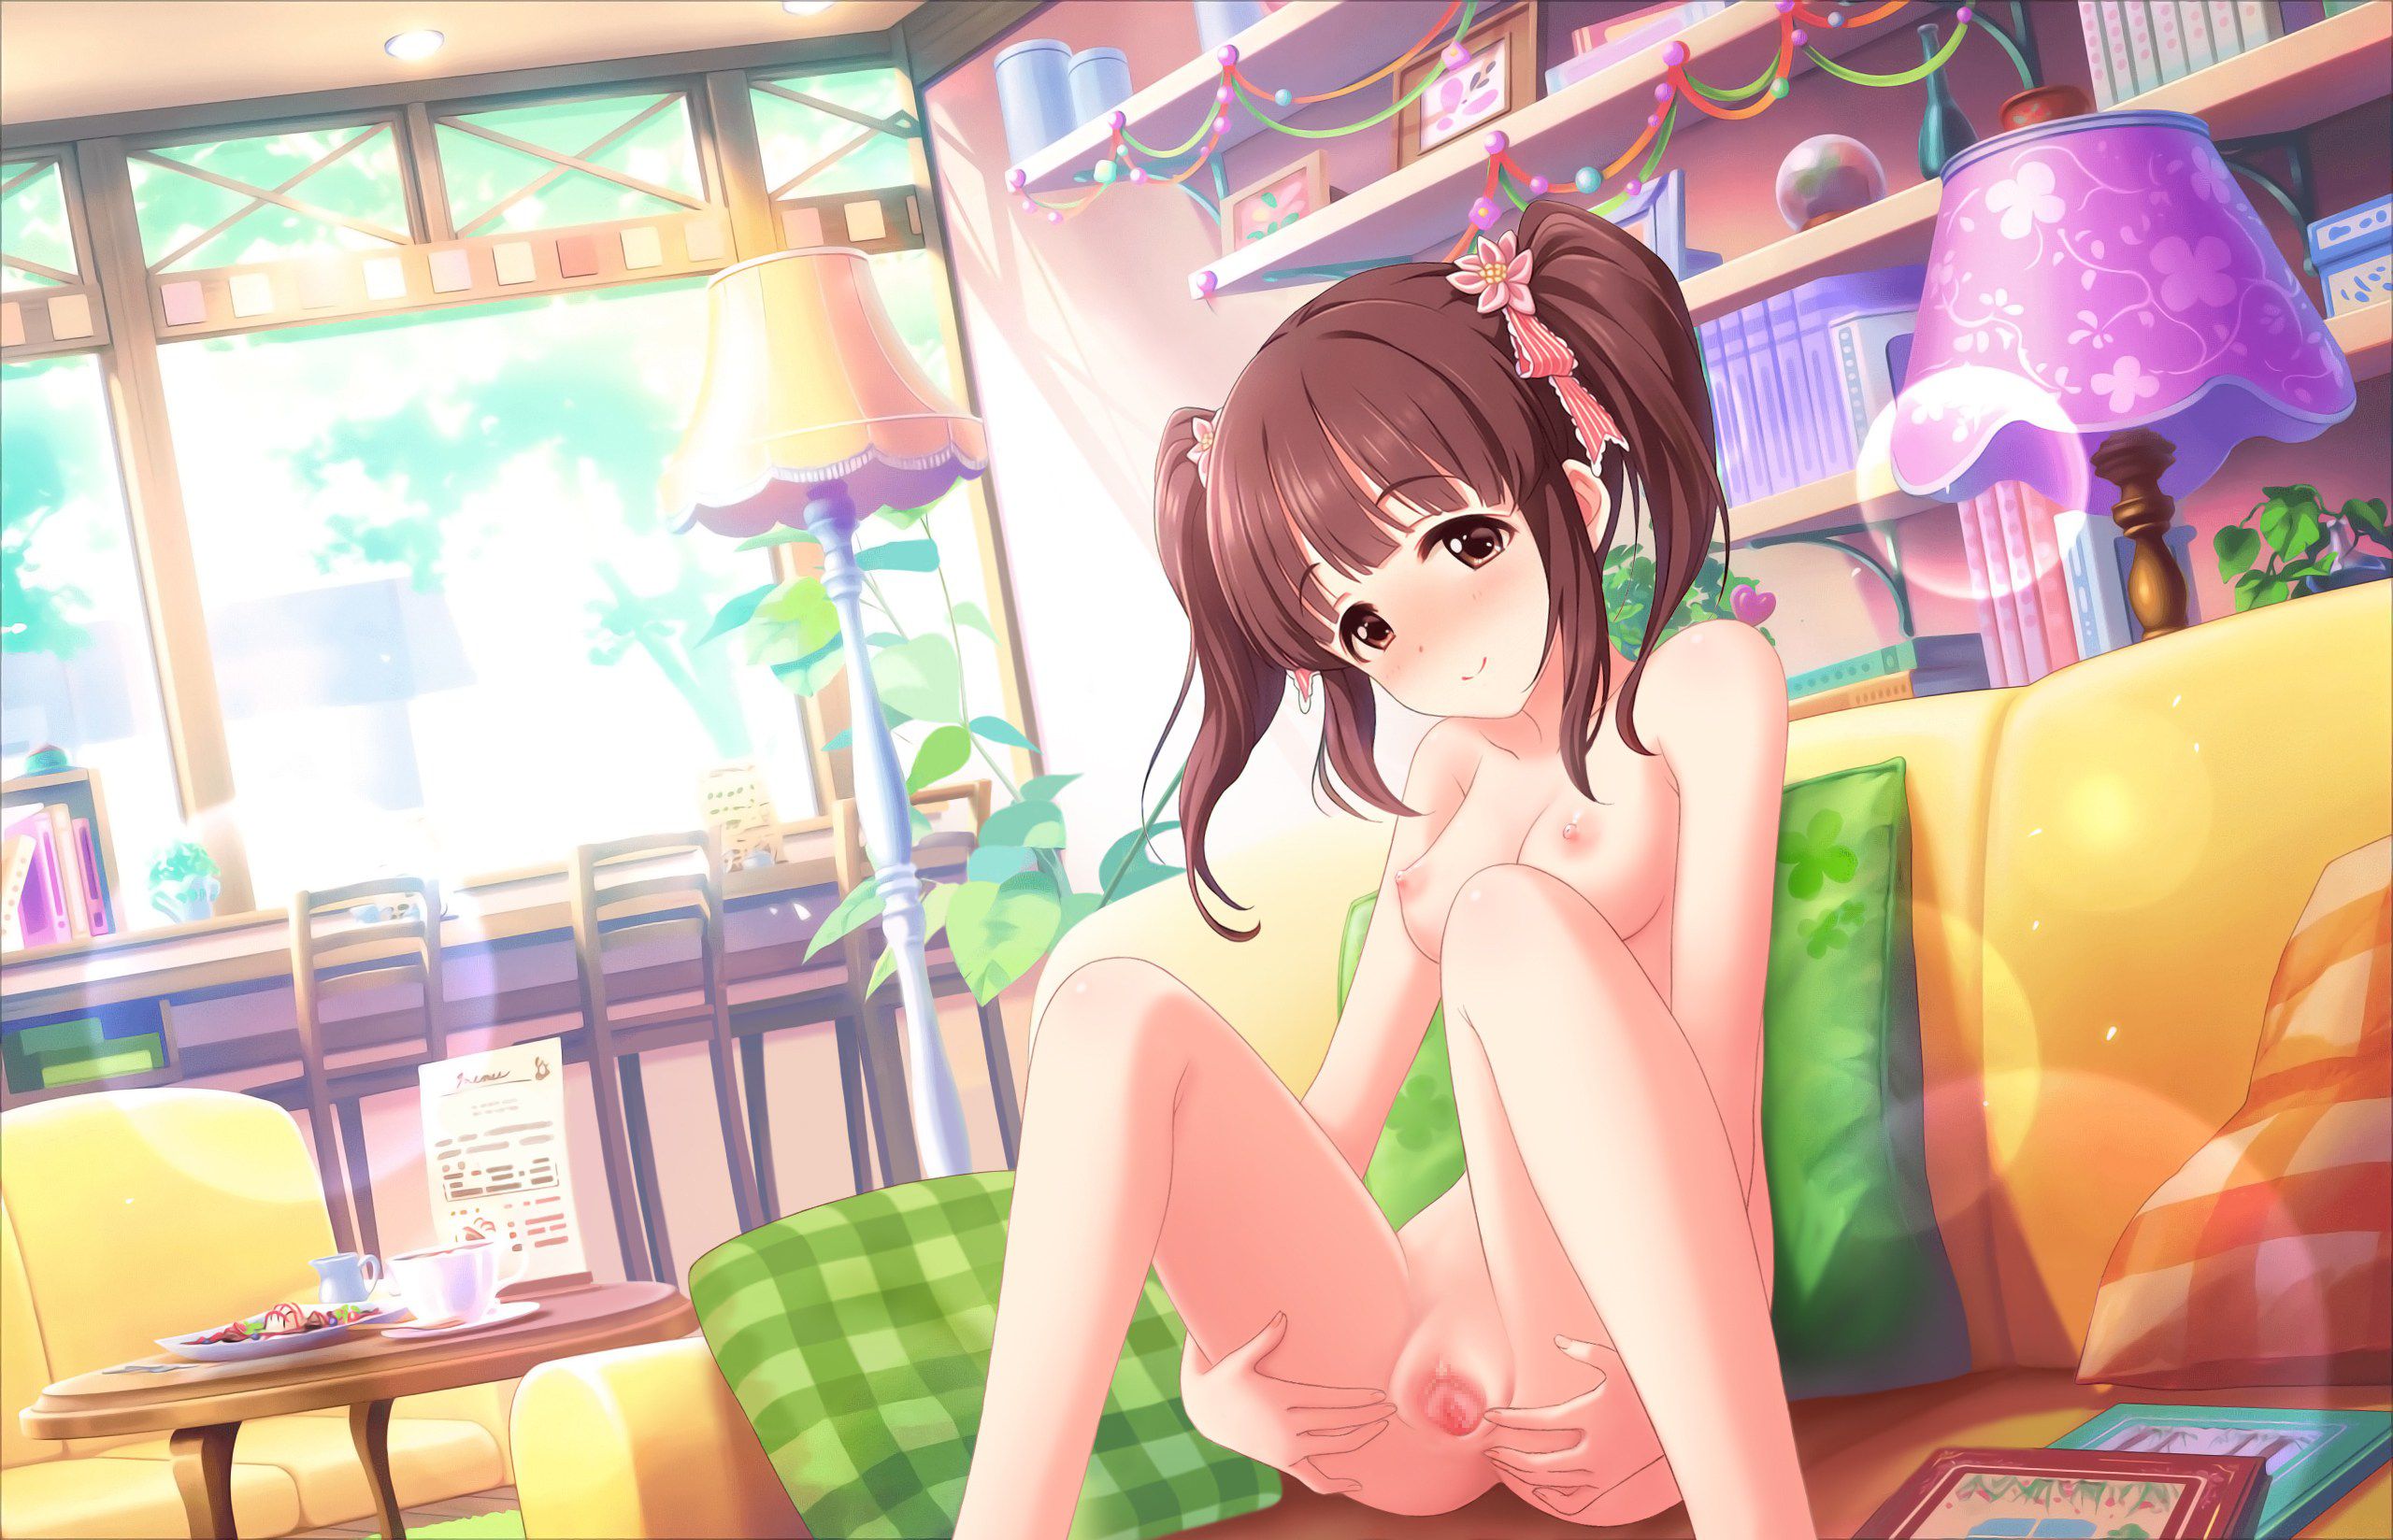 [Idolmaster] of the eye mass stripping of Photoshop and erotic Photoshop is wonderful that 43 16